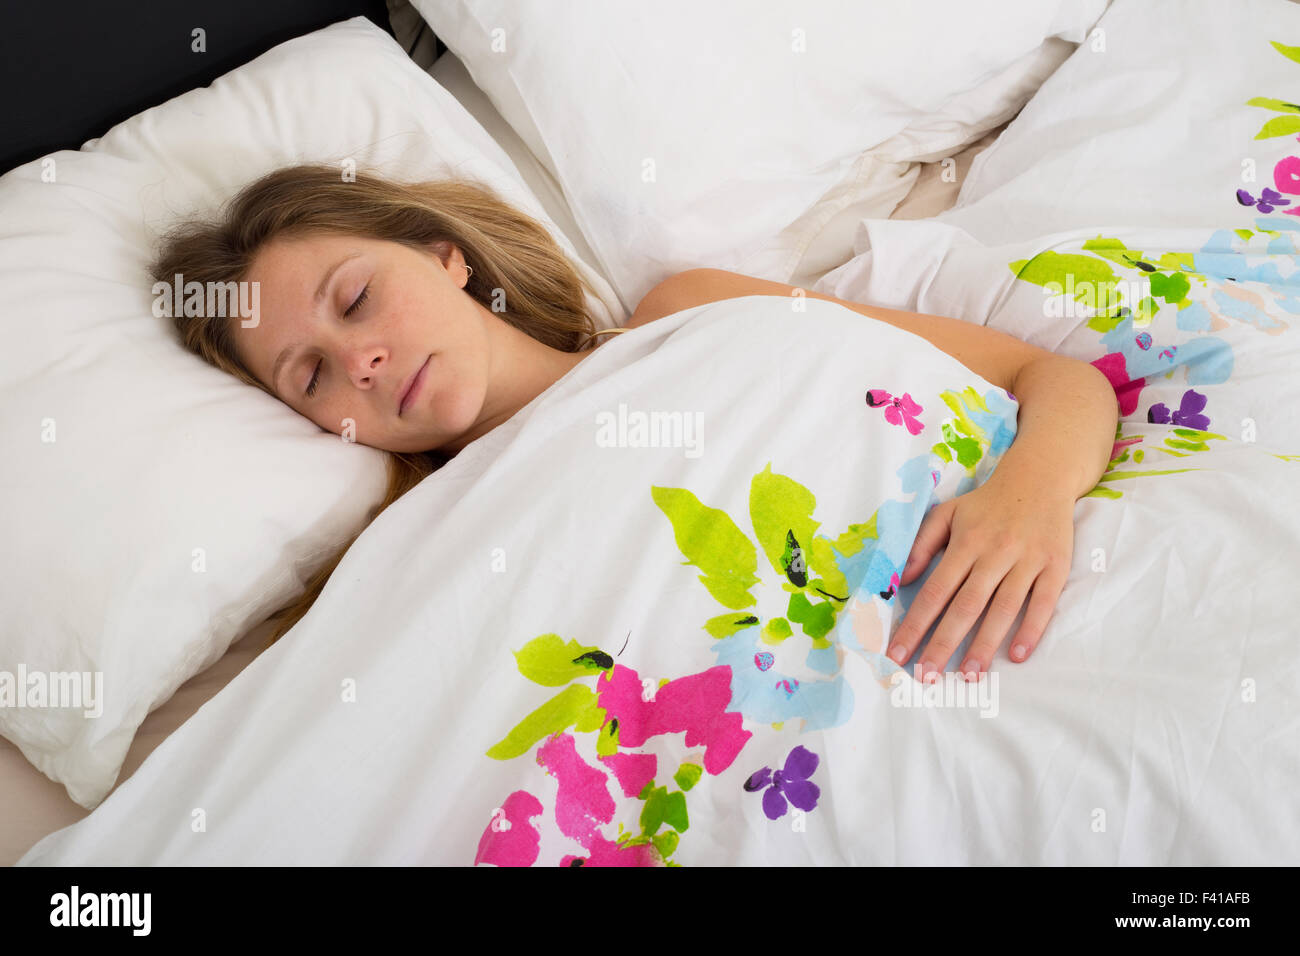 young woman asleep in bed Stock Photo